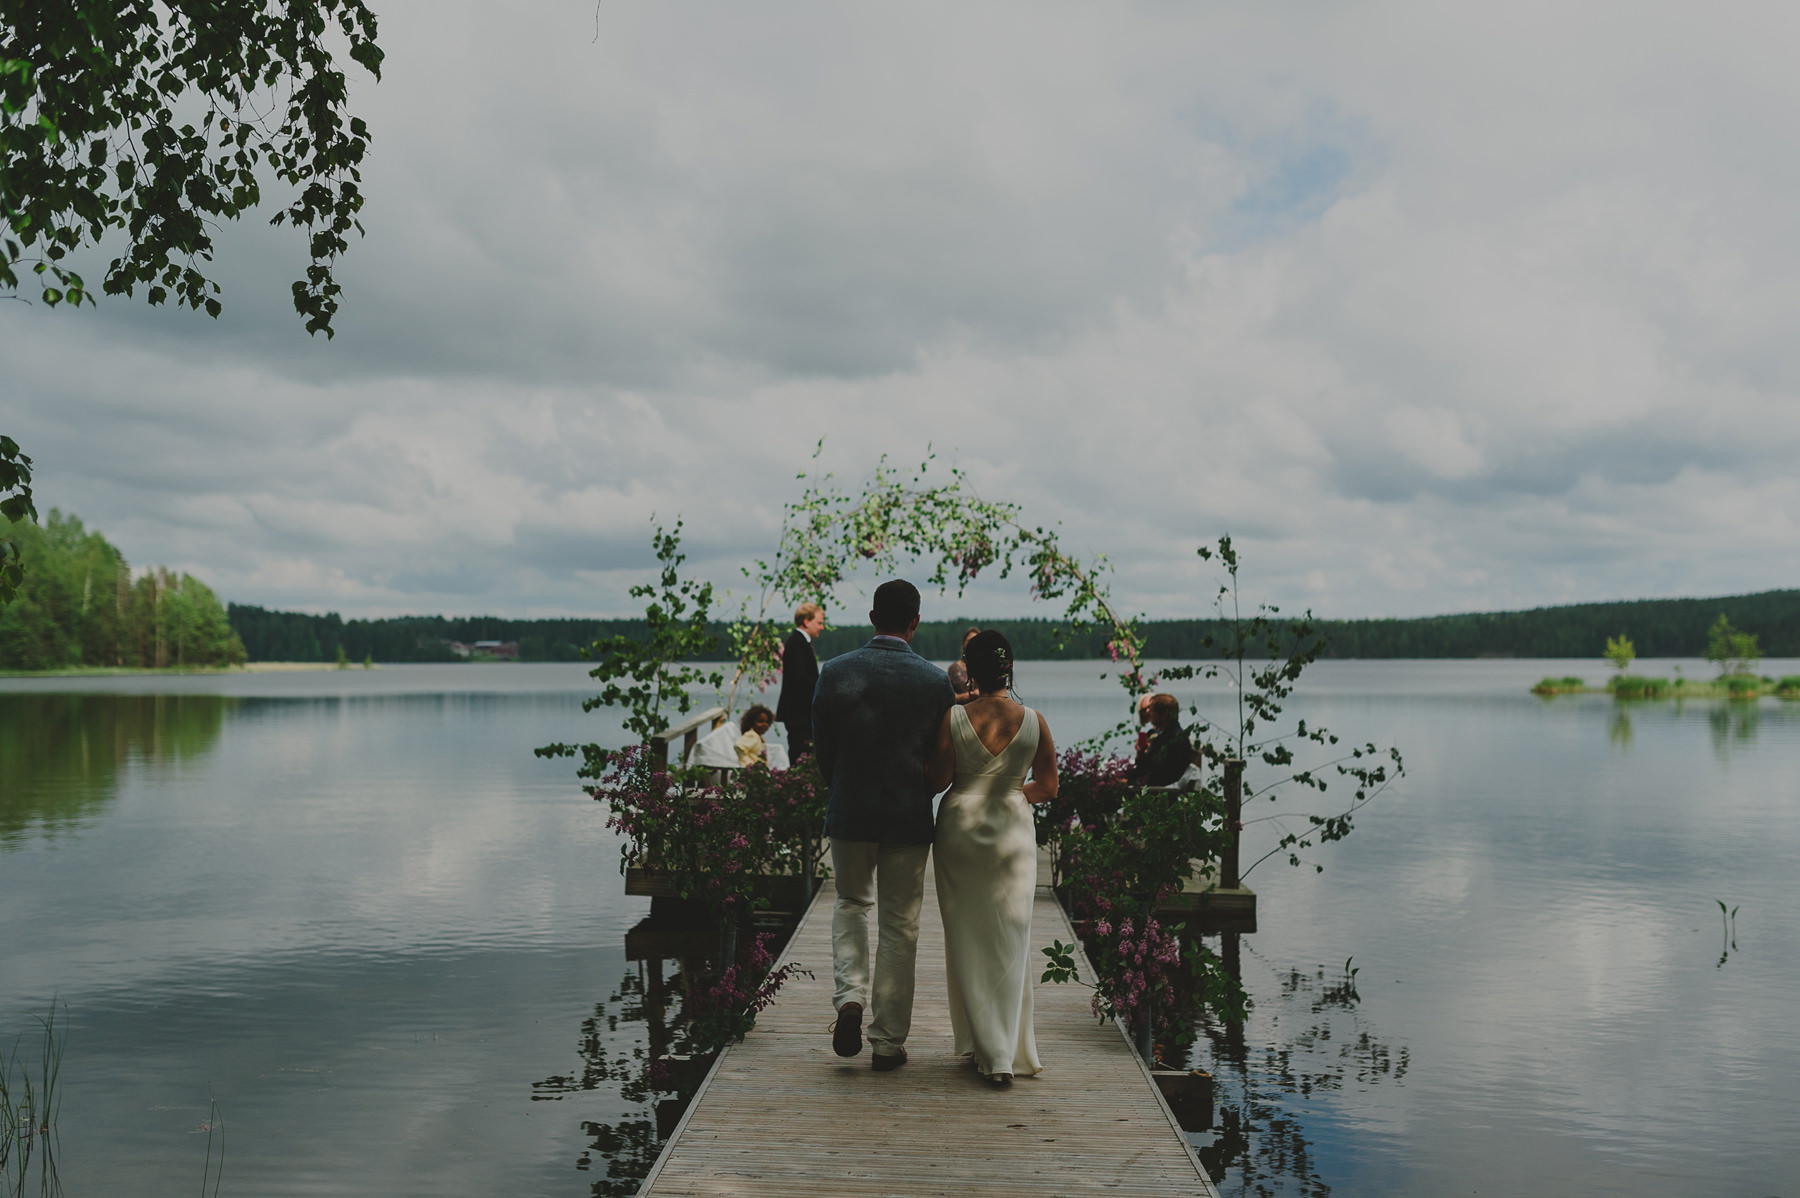 Eloping in Finland